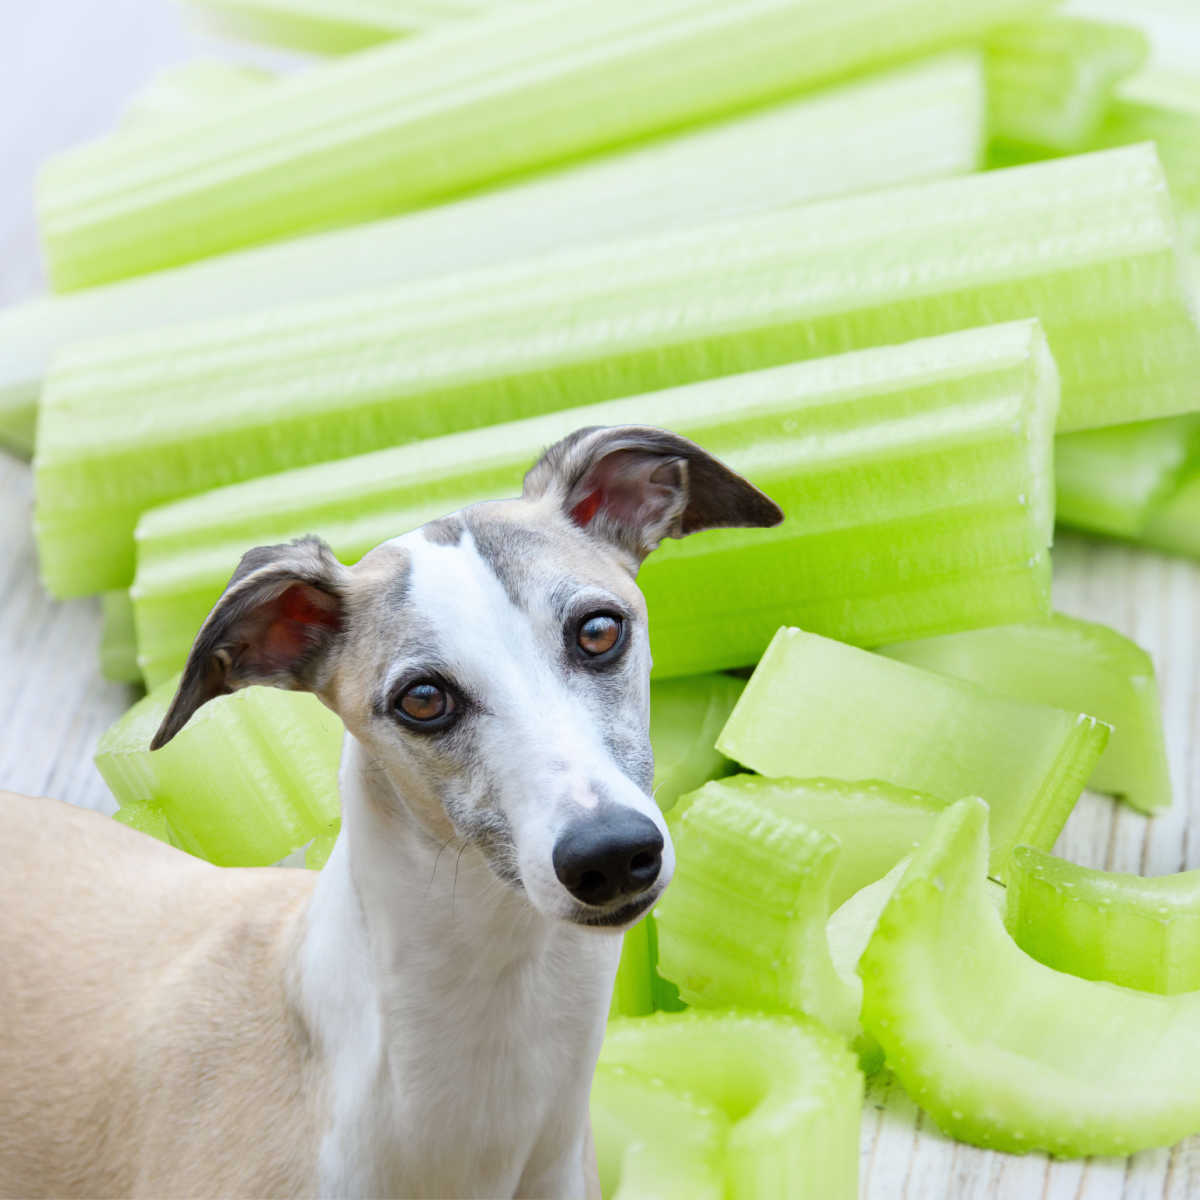 dog in front of celery sticks and pieces.